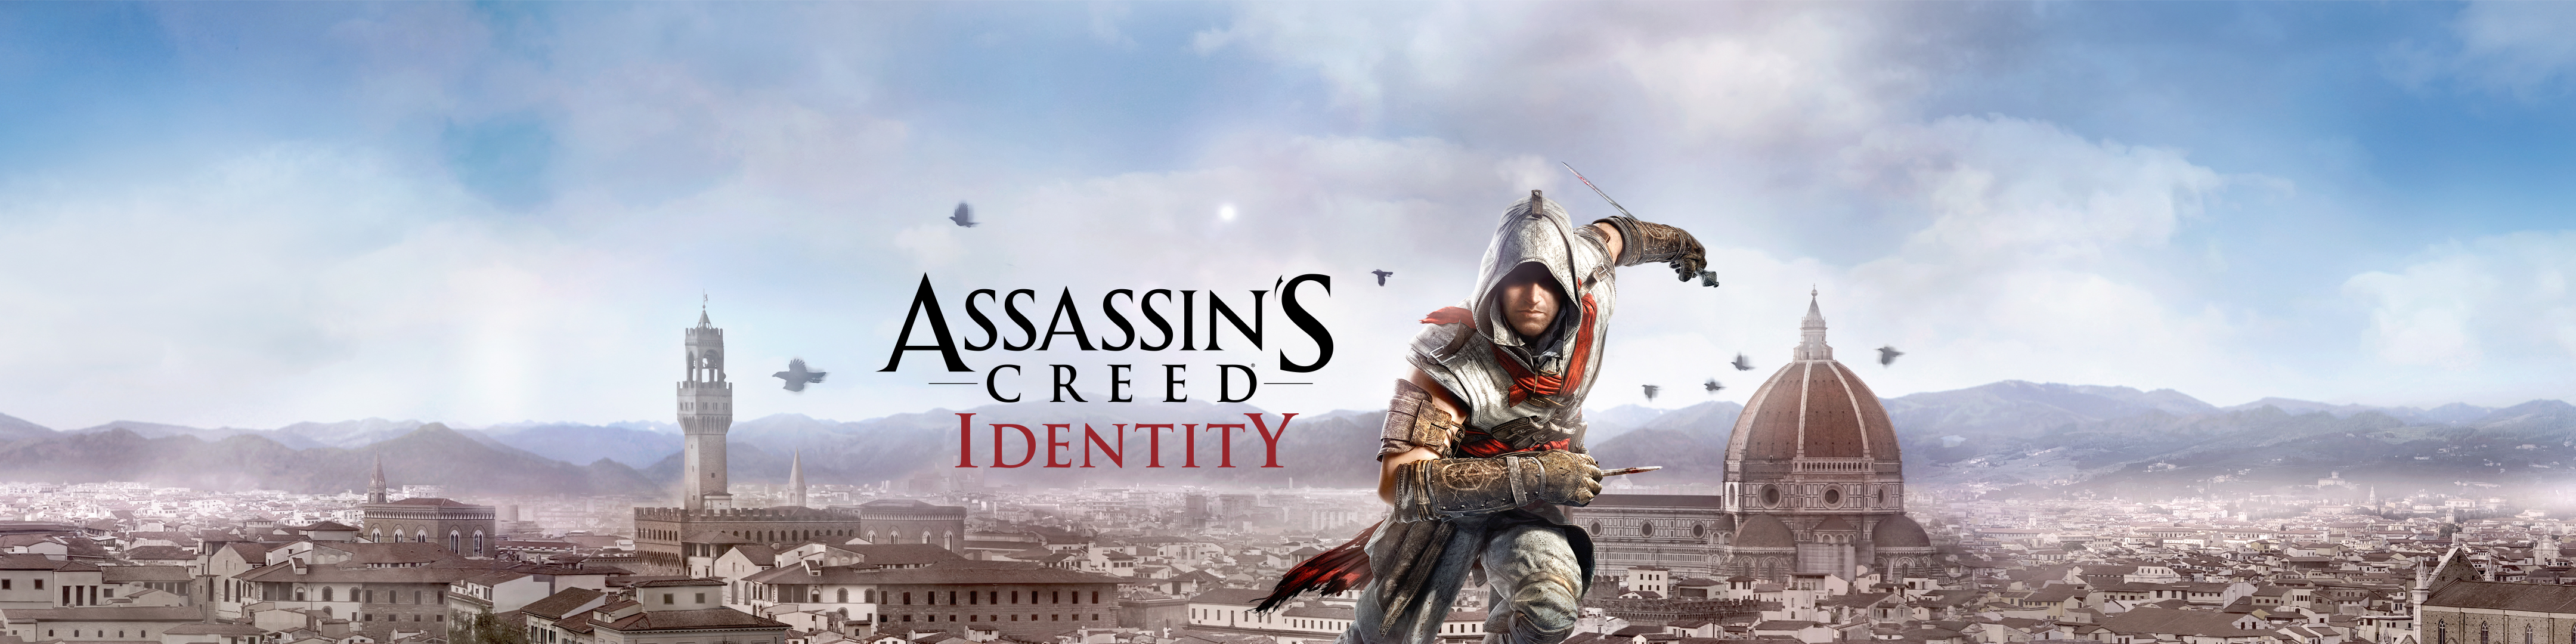 Video Game Assassin's Creed Identity HD Wallpaper | Background Image